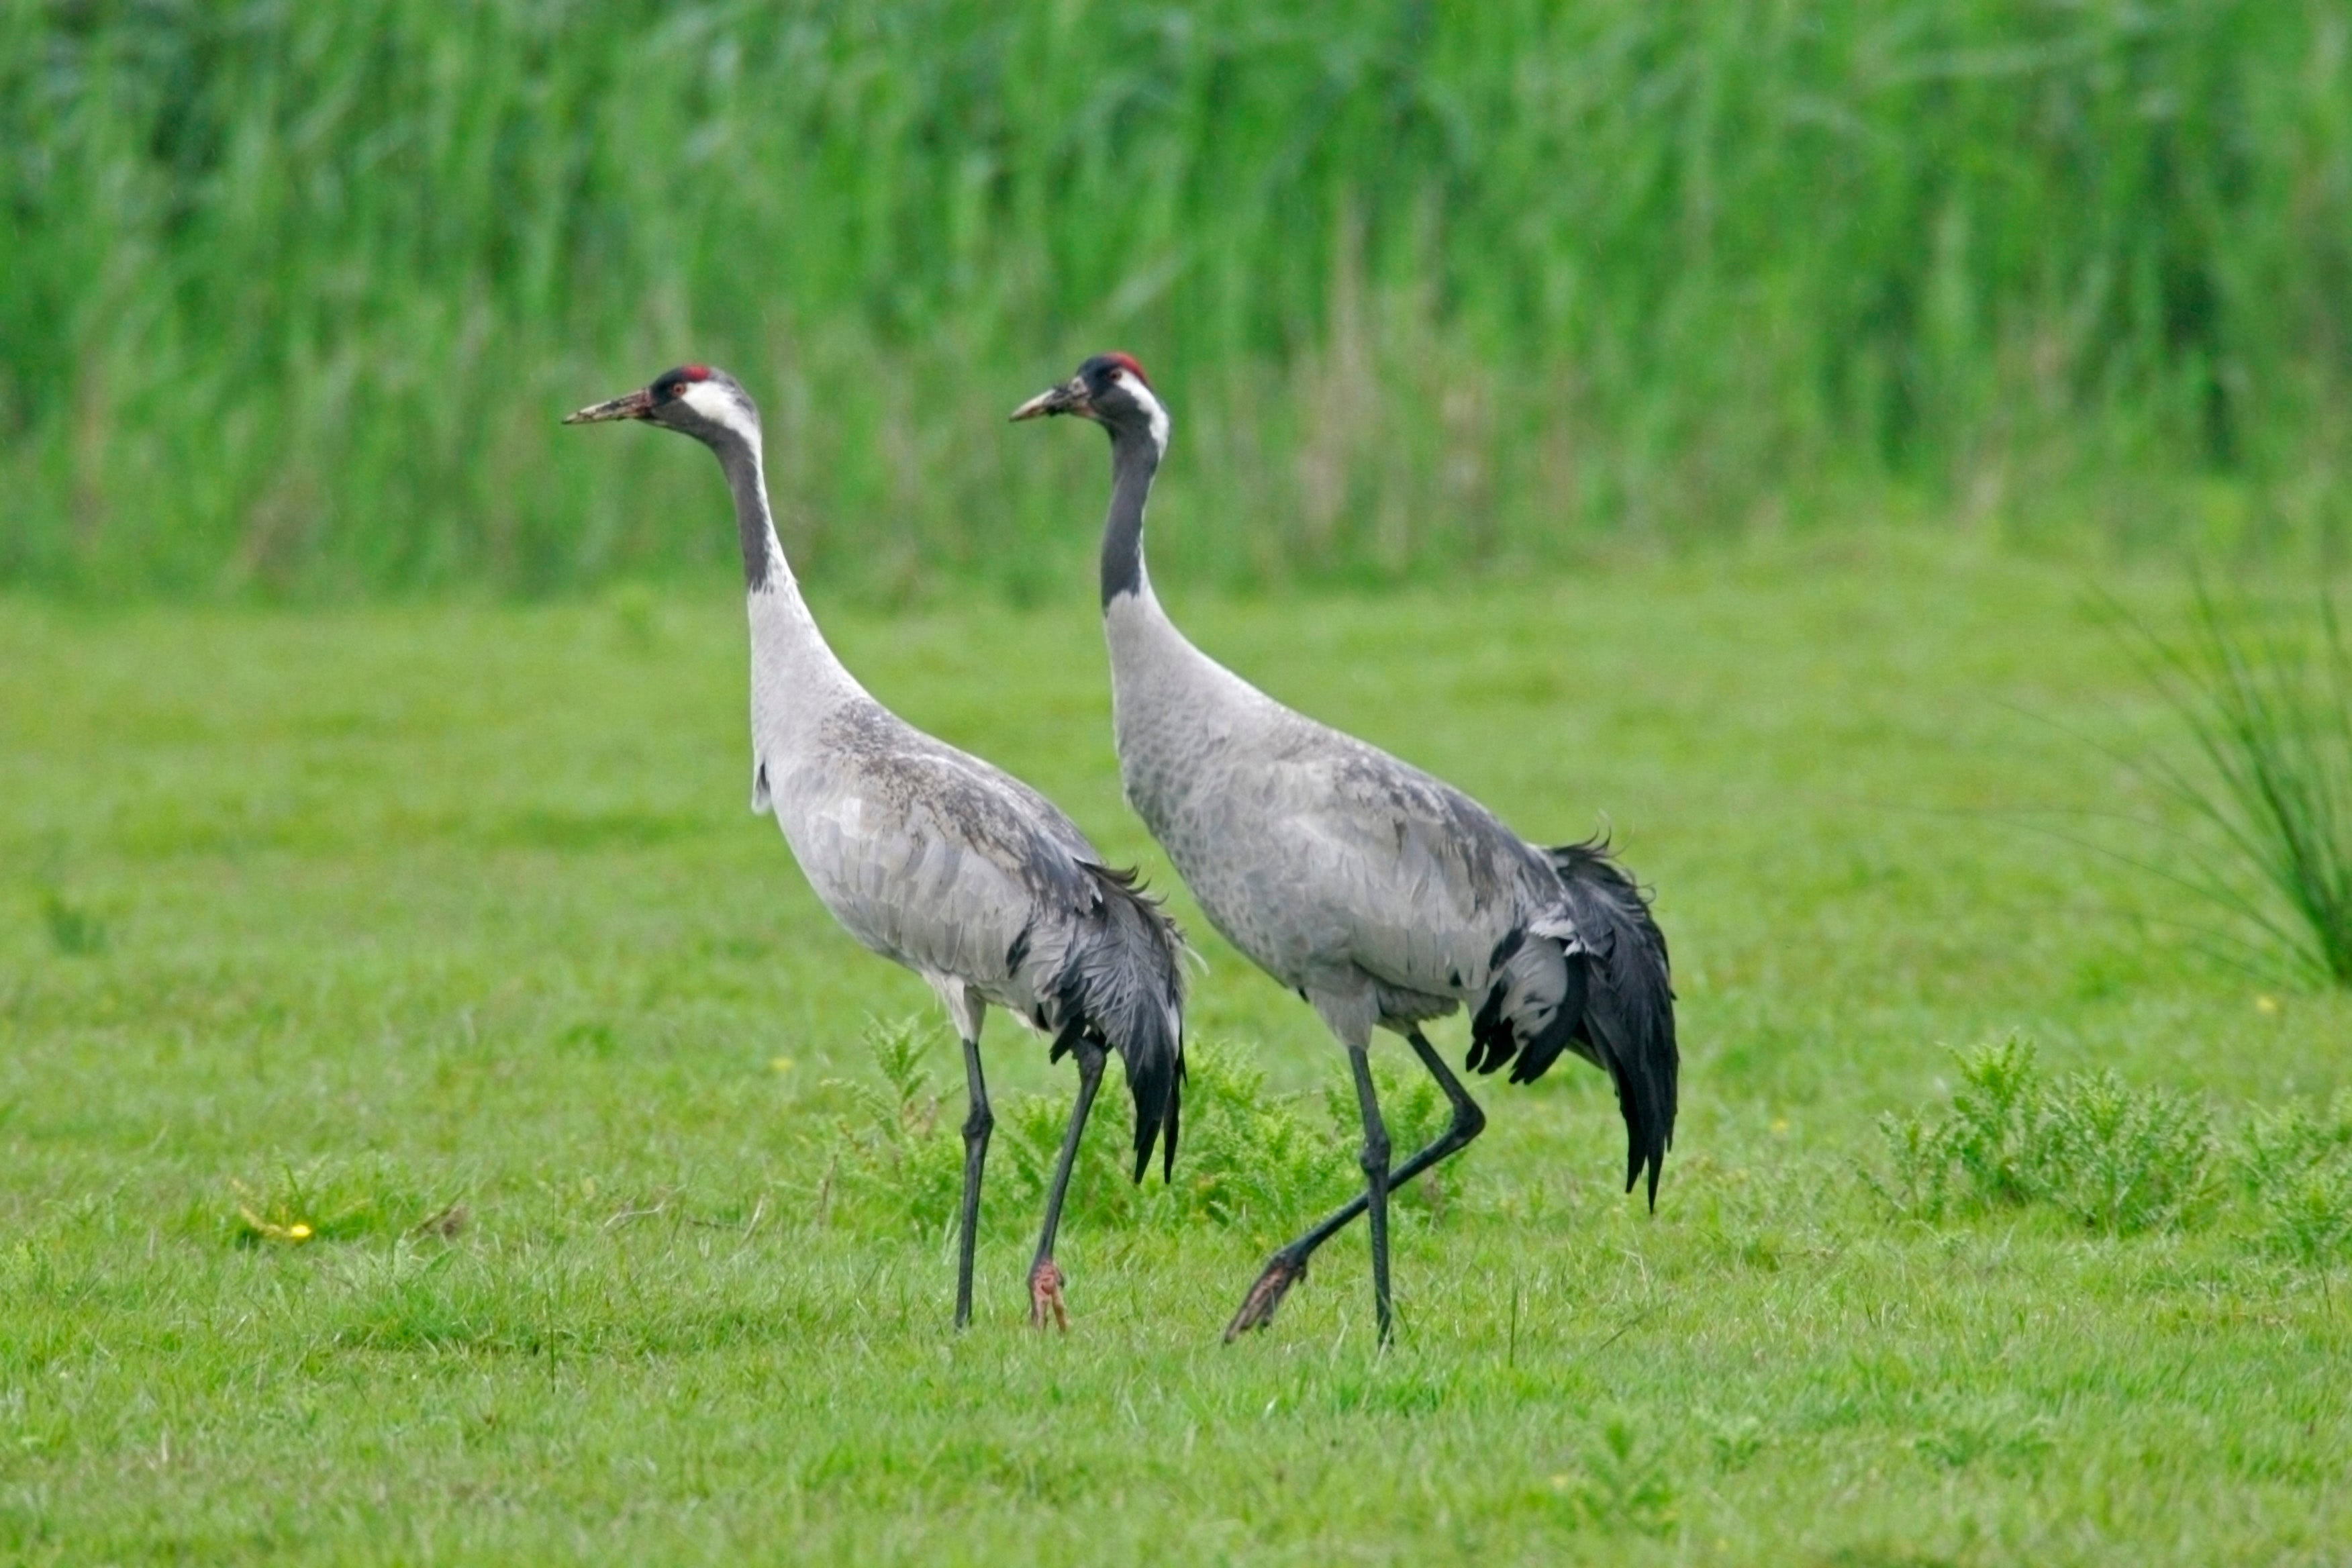 A pair of Grus grus cranes pictured at the Lakenheath Fen RSPB reserve in Suffolk, England